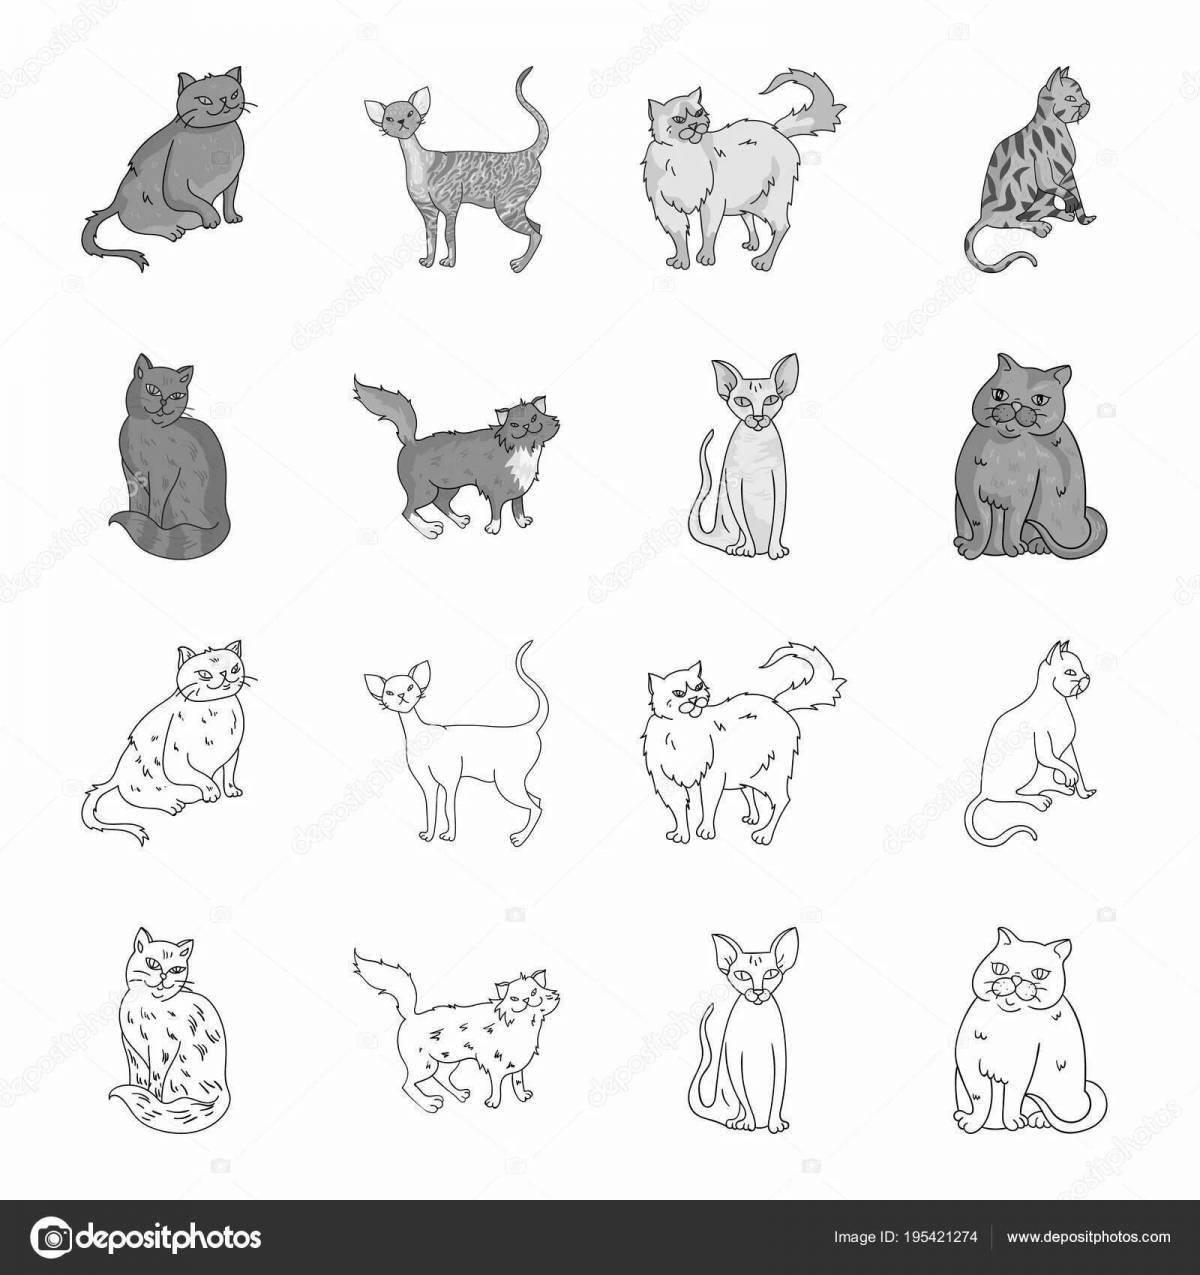 Dazzling cat coloring book